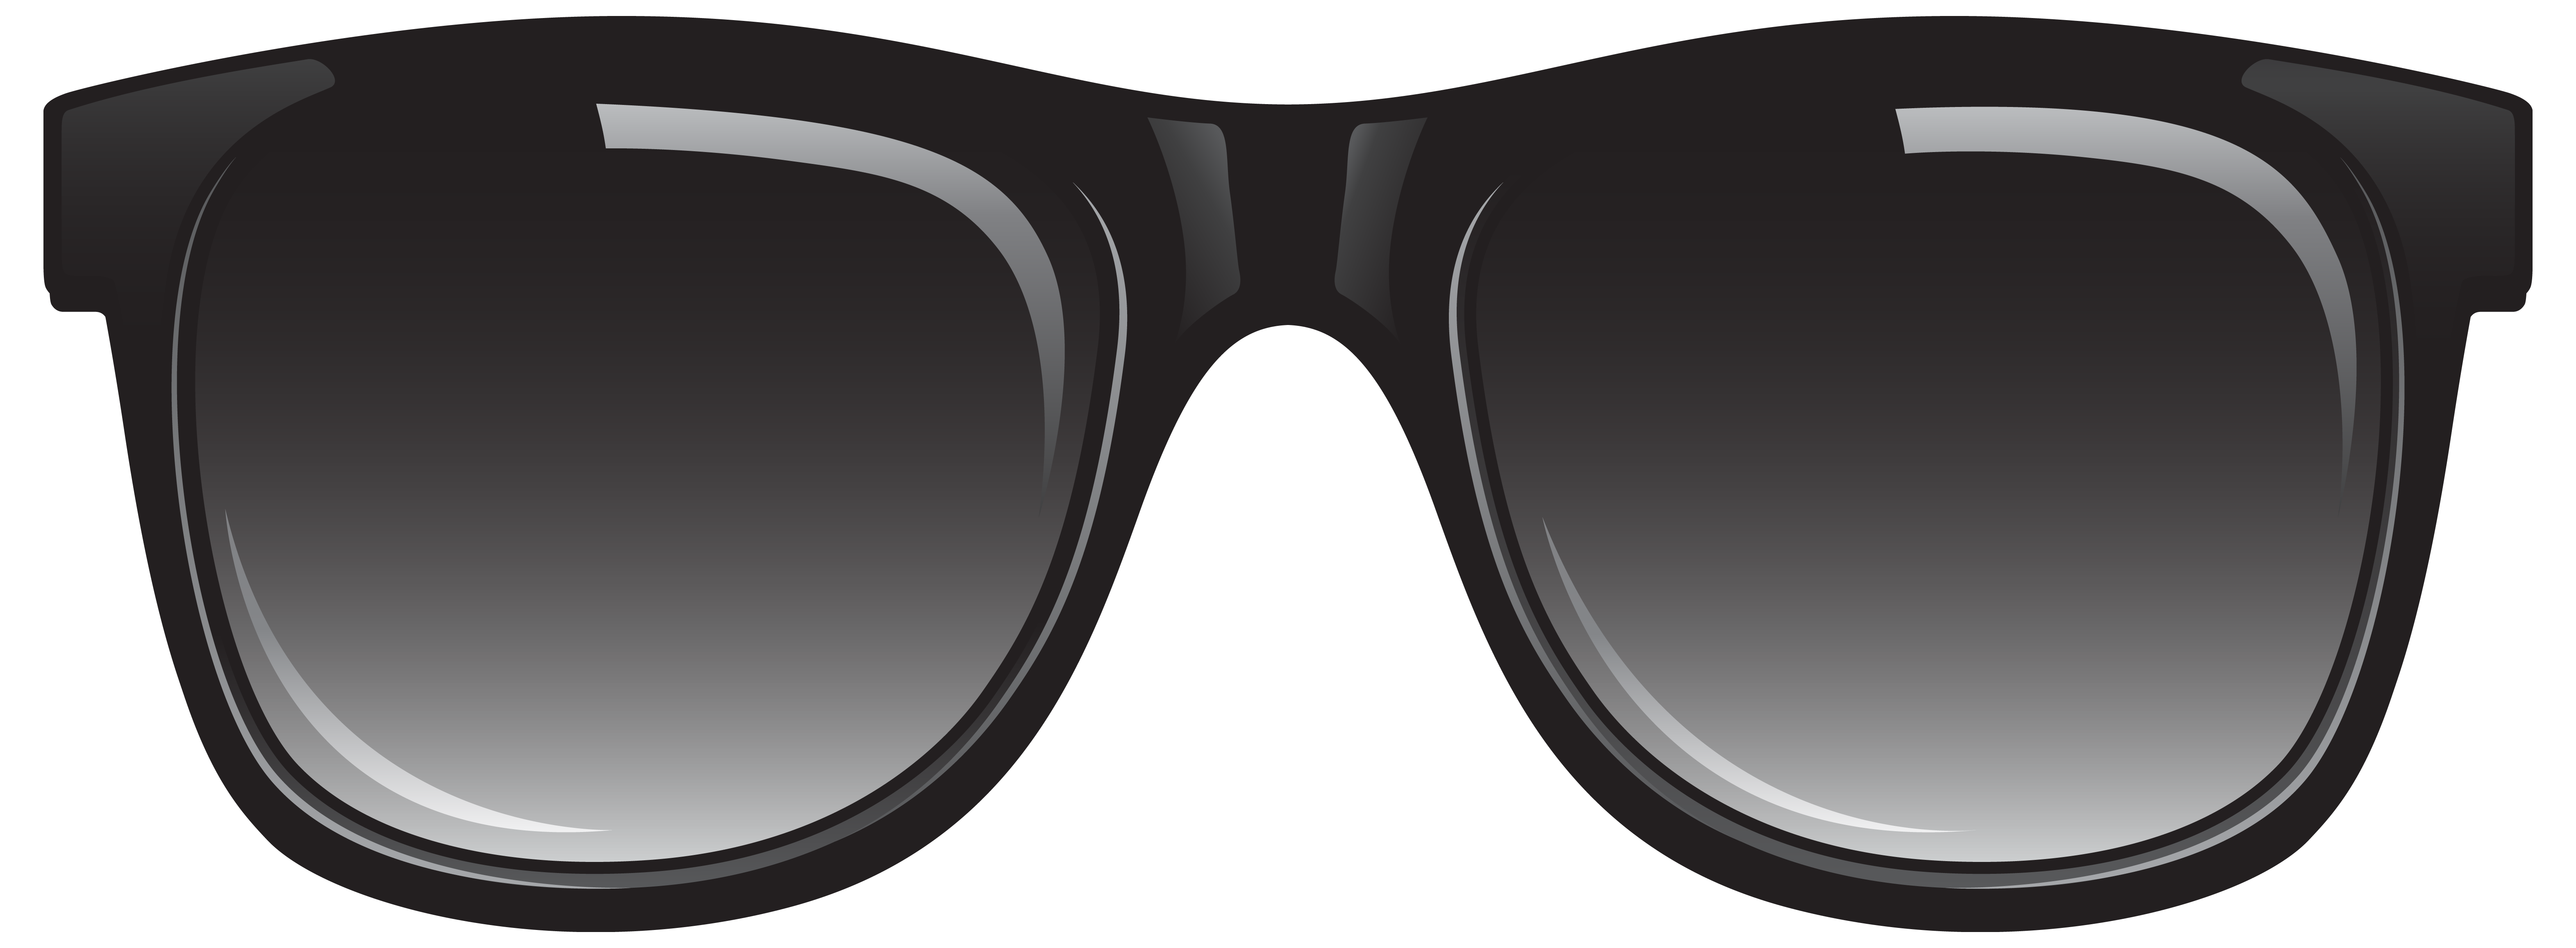 Black png image gallery. Sunglasses clipart